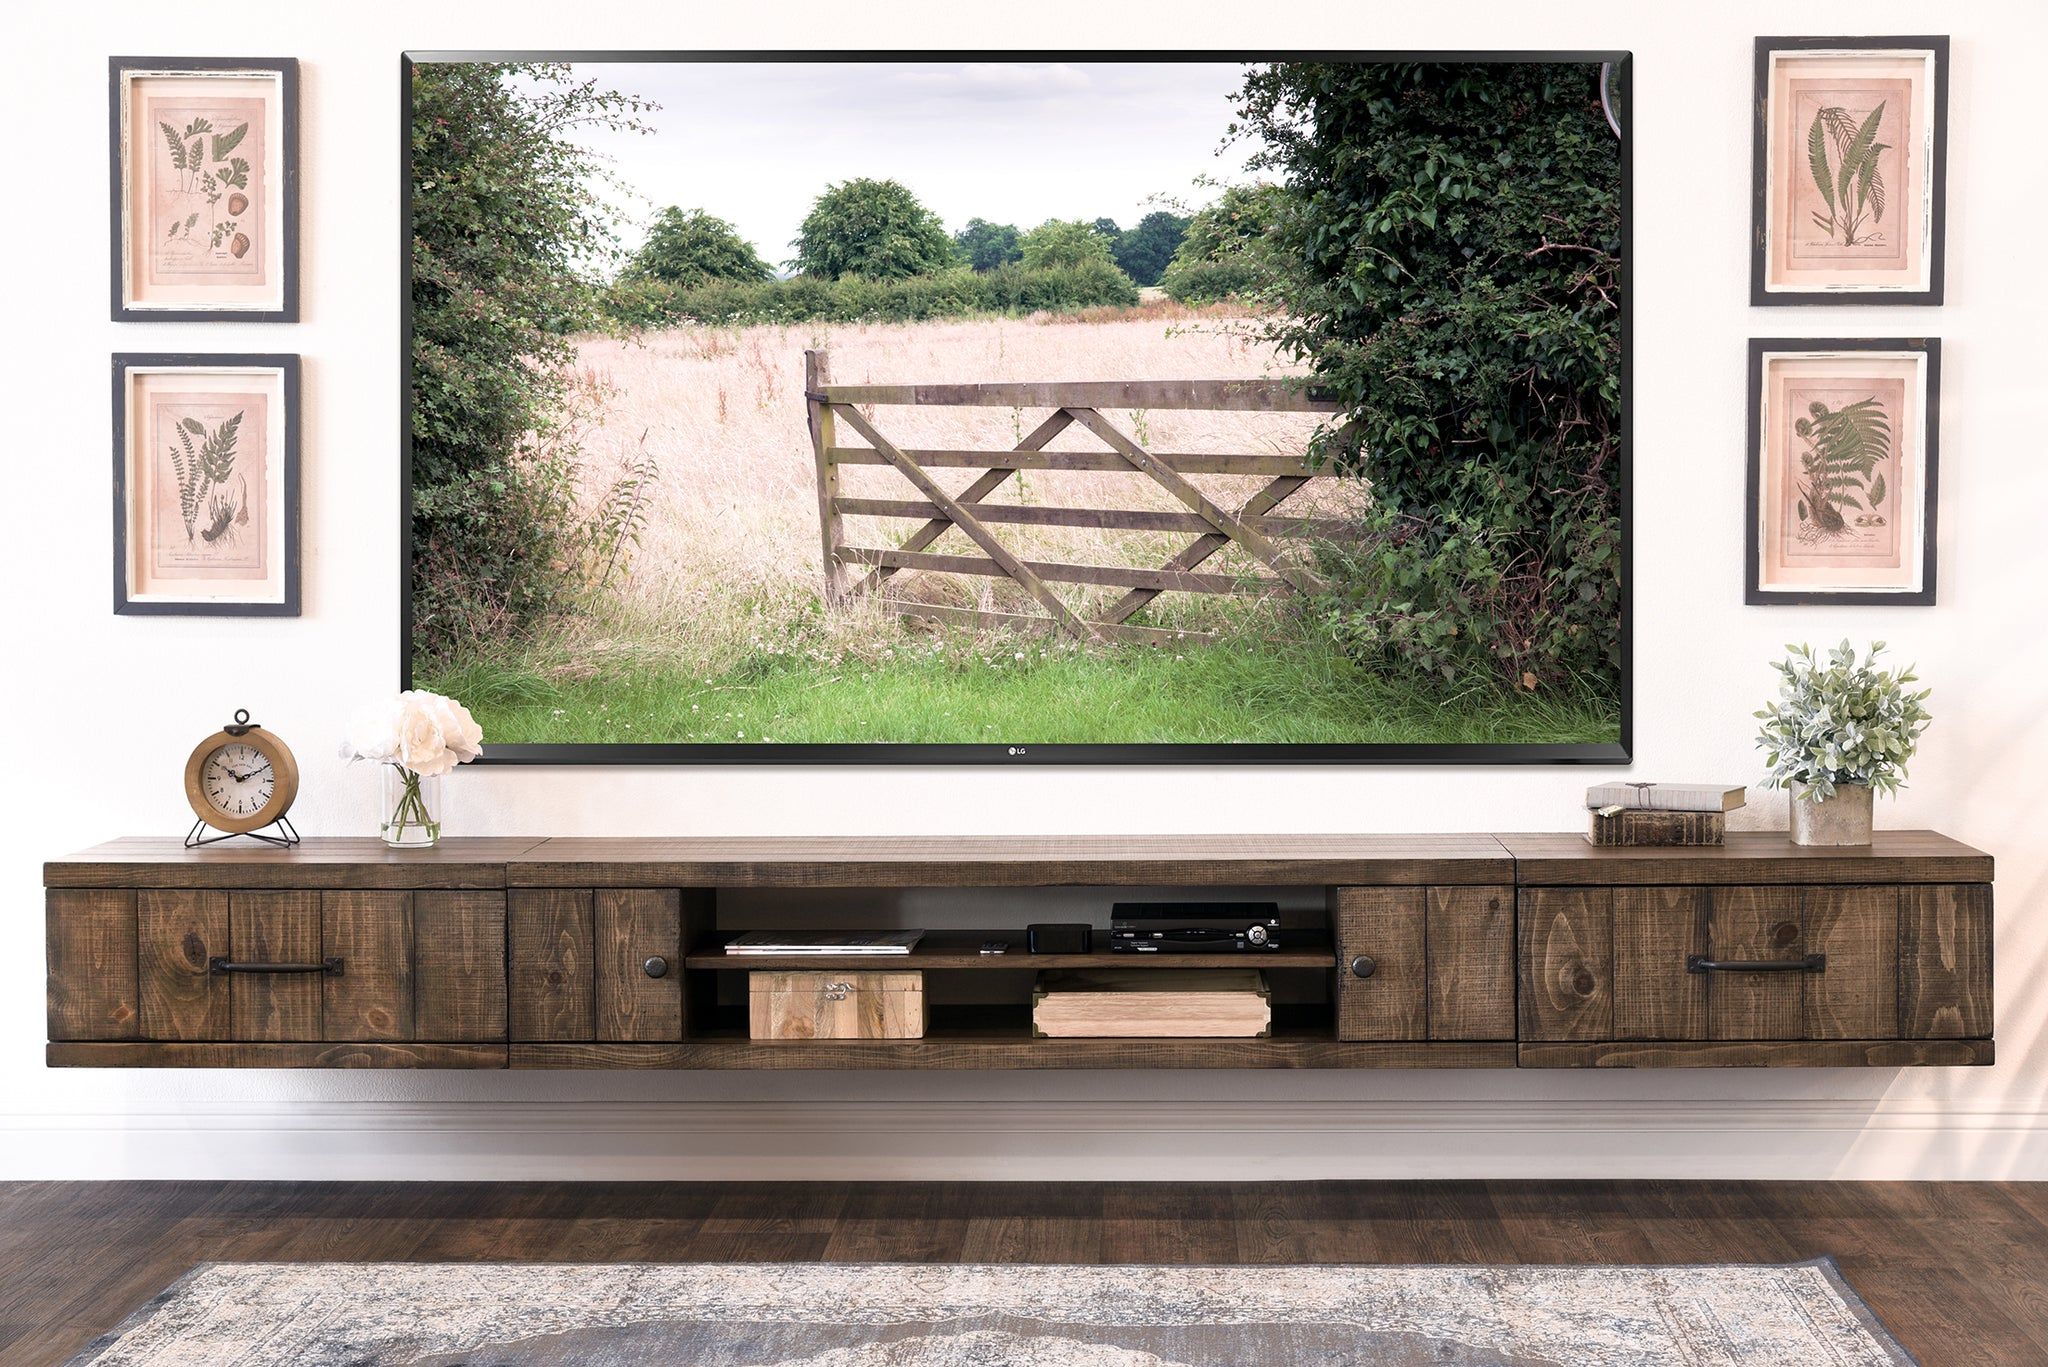 Farmhouse Rustic Wood Floating Tv Stand Entertainment Center – Spice With Regard To Modern Farmhouse Rustic Tv Stands (View 4 of 20)